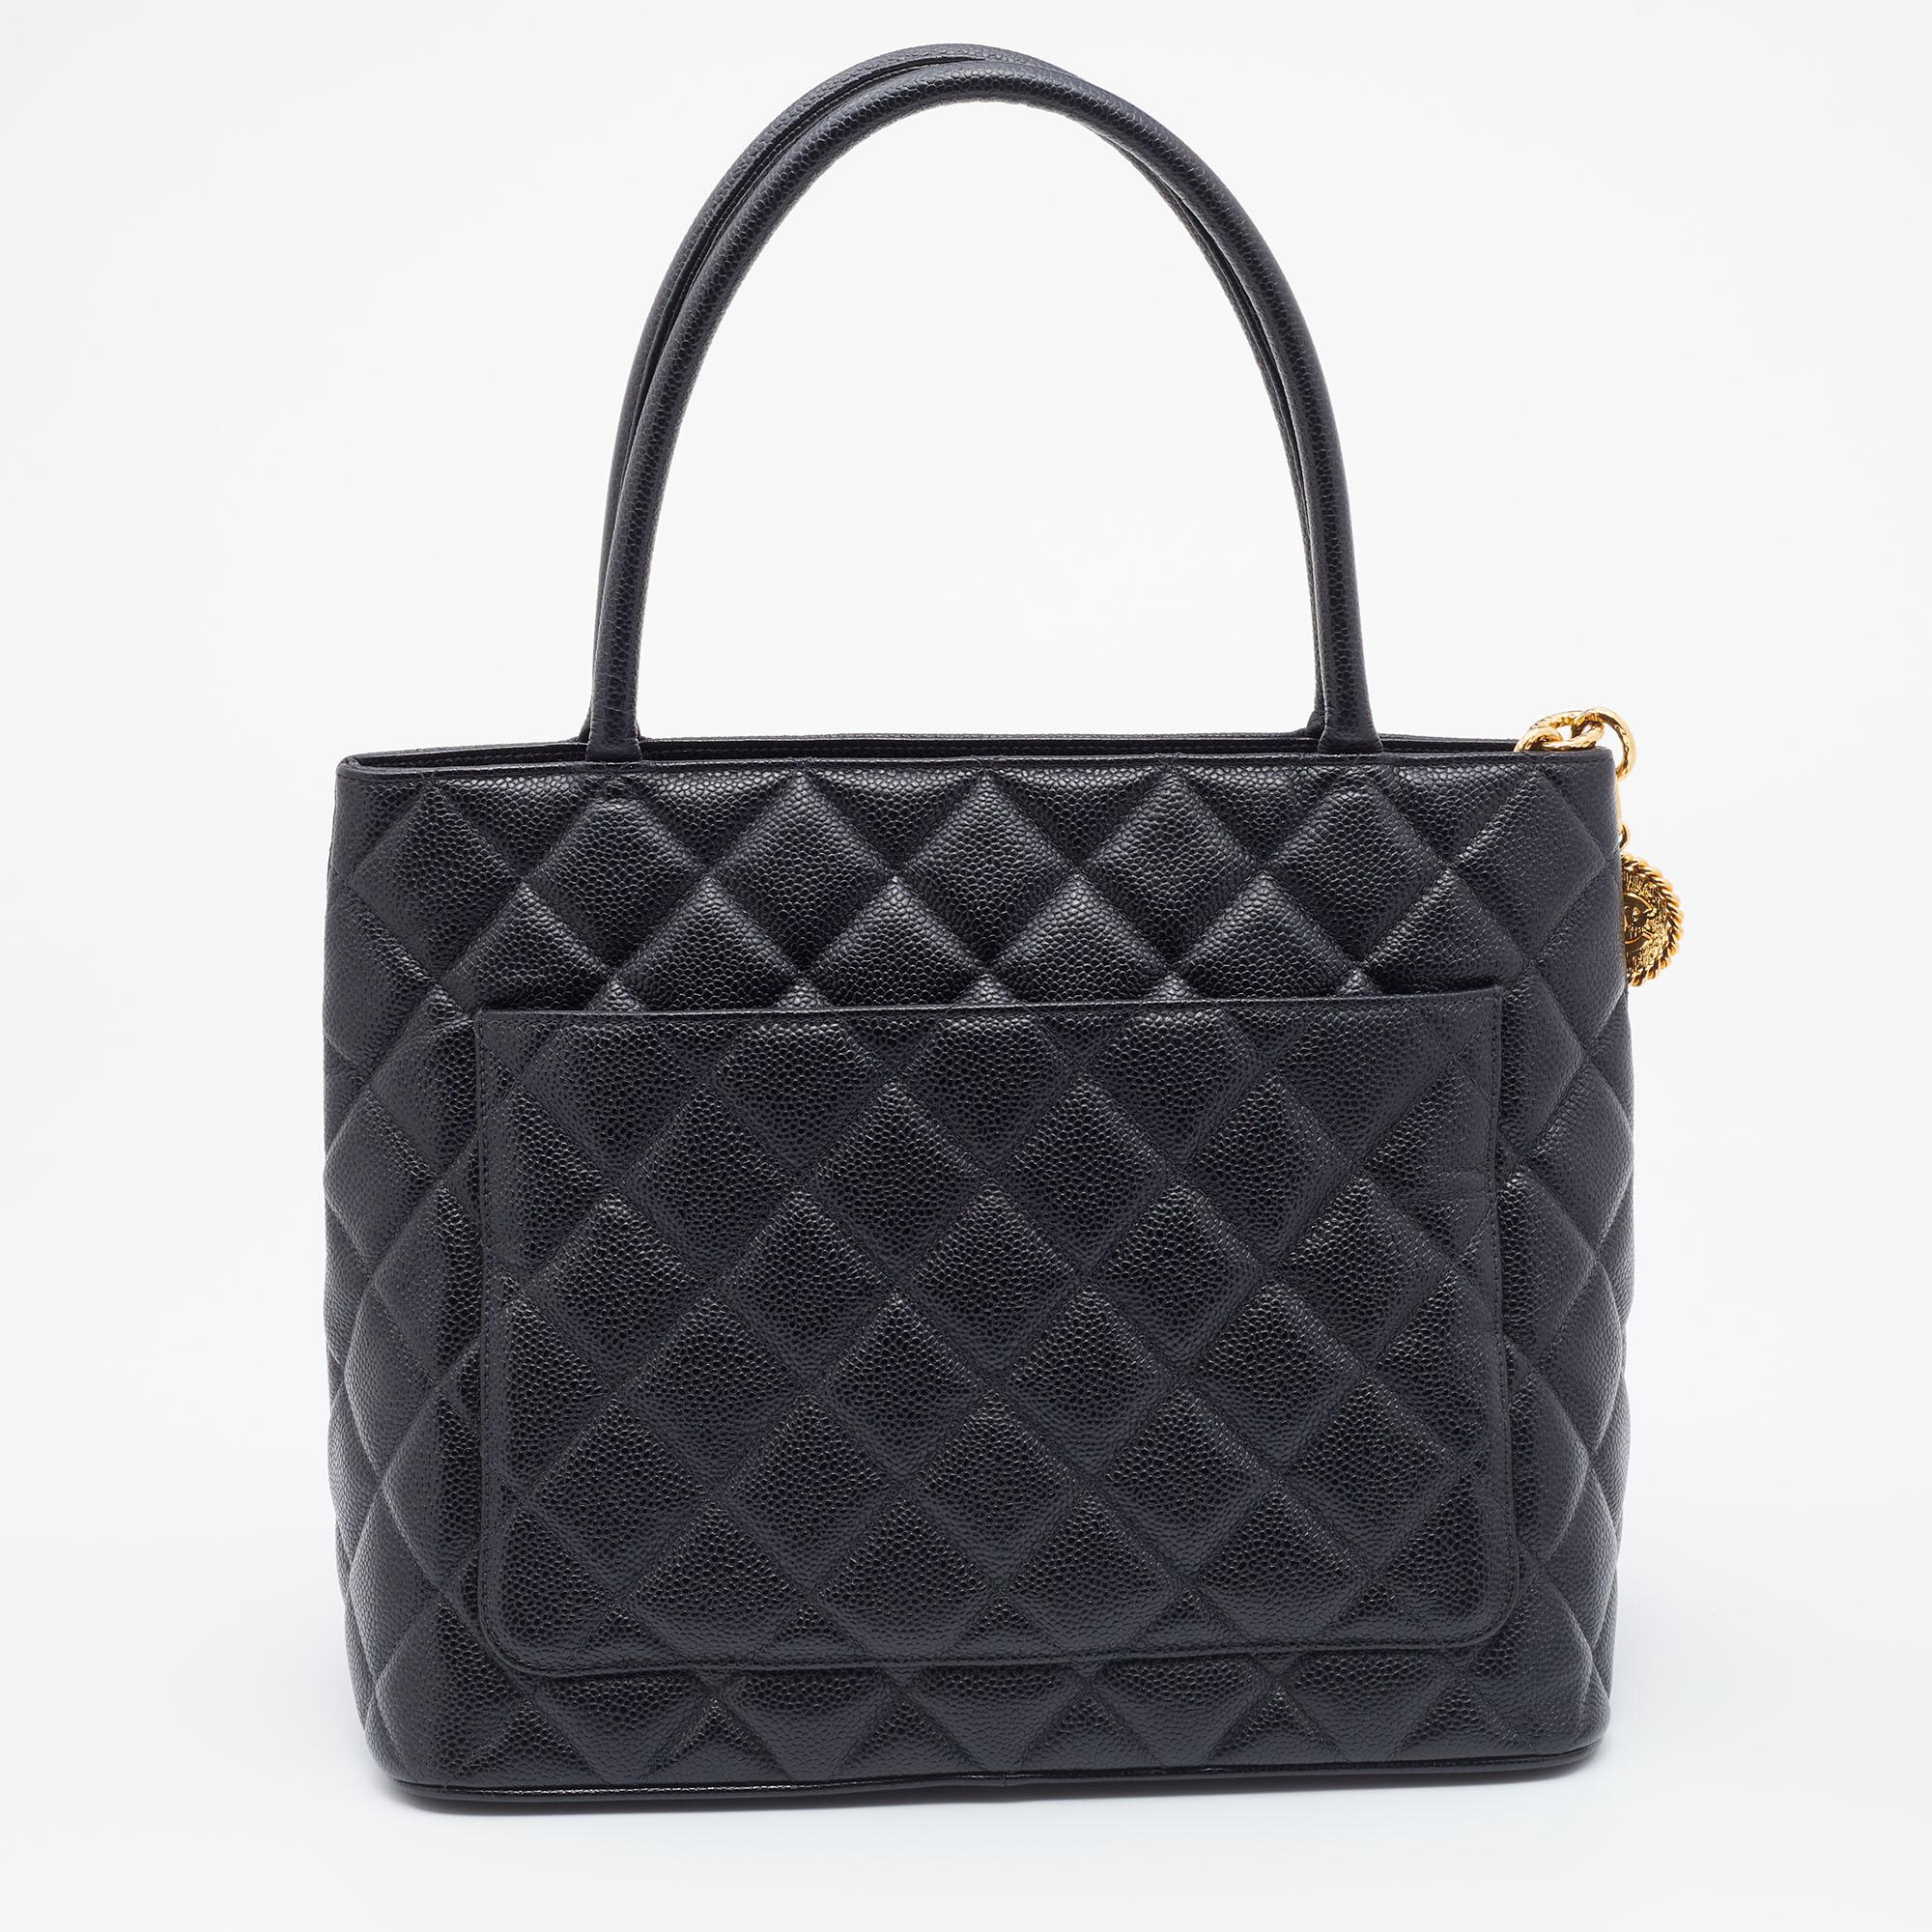 This Chanel tote is a favorite among fashionistas! Featuring the signature quilt and the 'CC' logo on the Caviar leather exterior, this black-colored tote has a luxe look. Equipped with two handles and a spacious interior for all your essentials, it